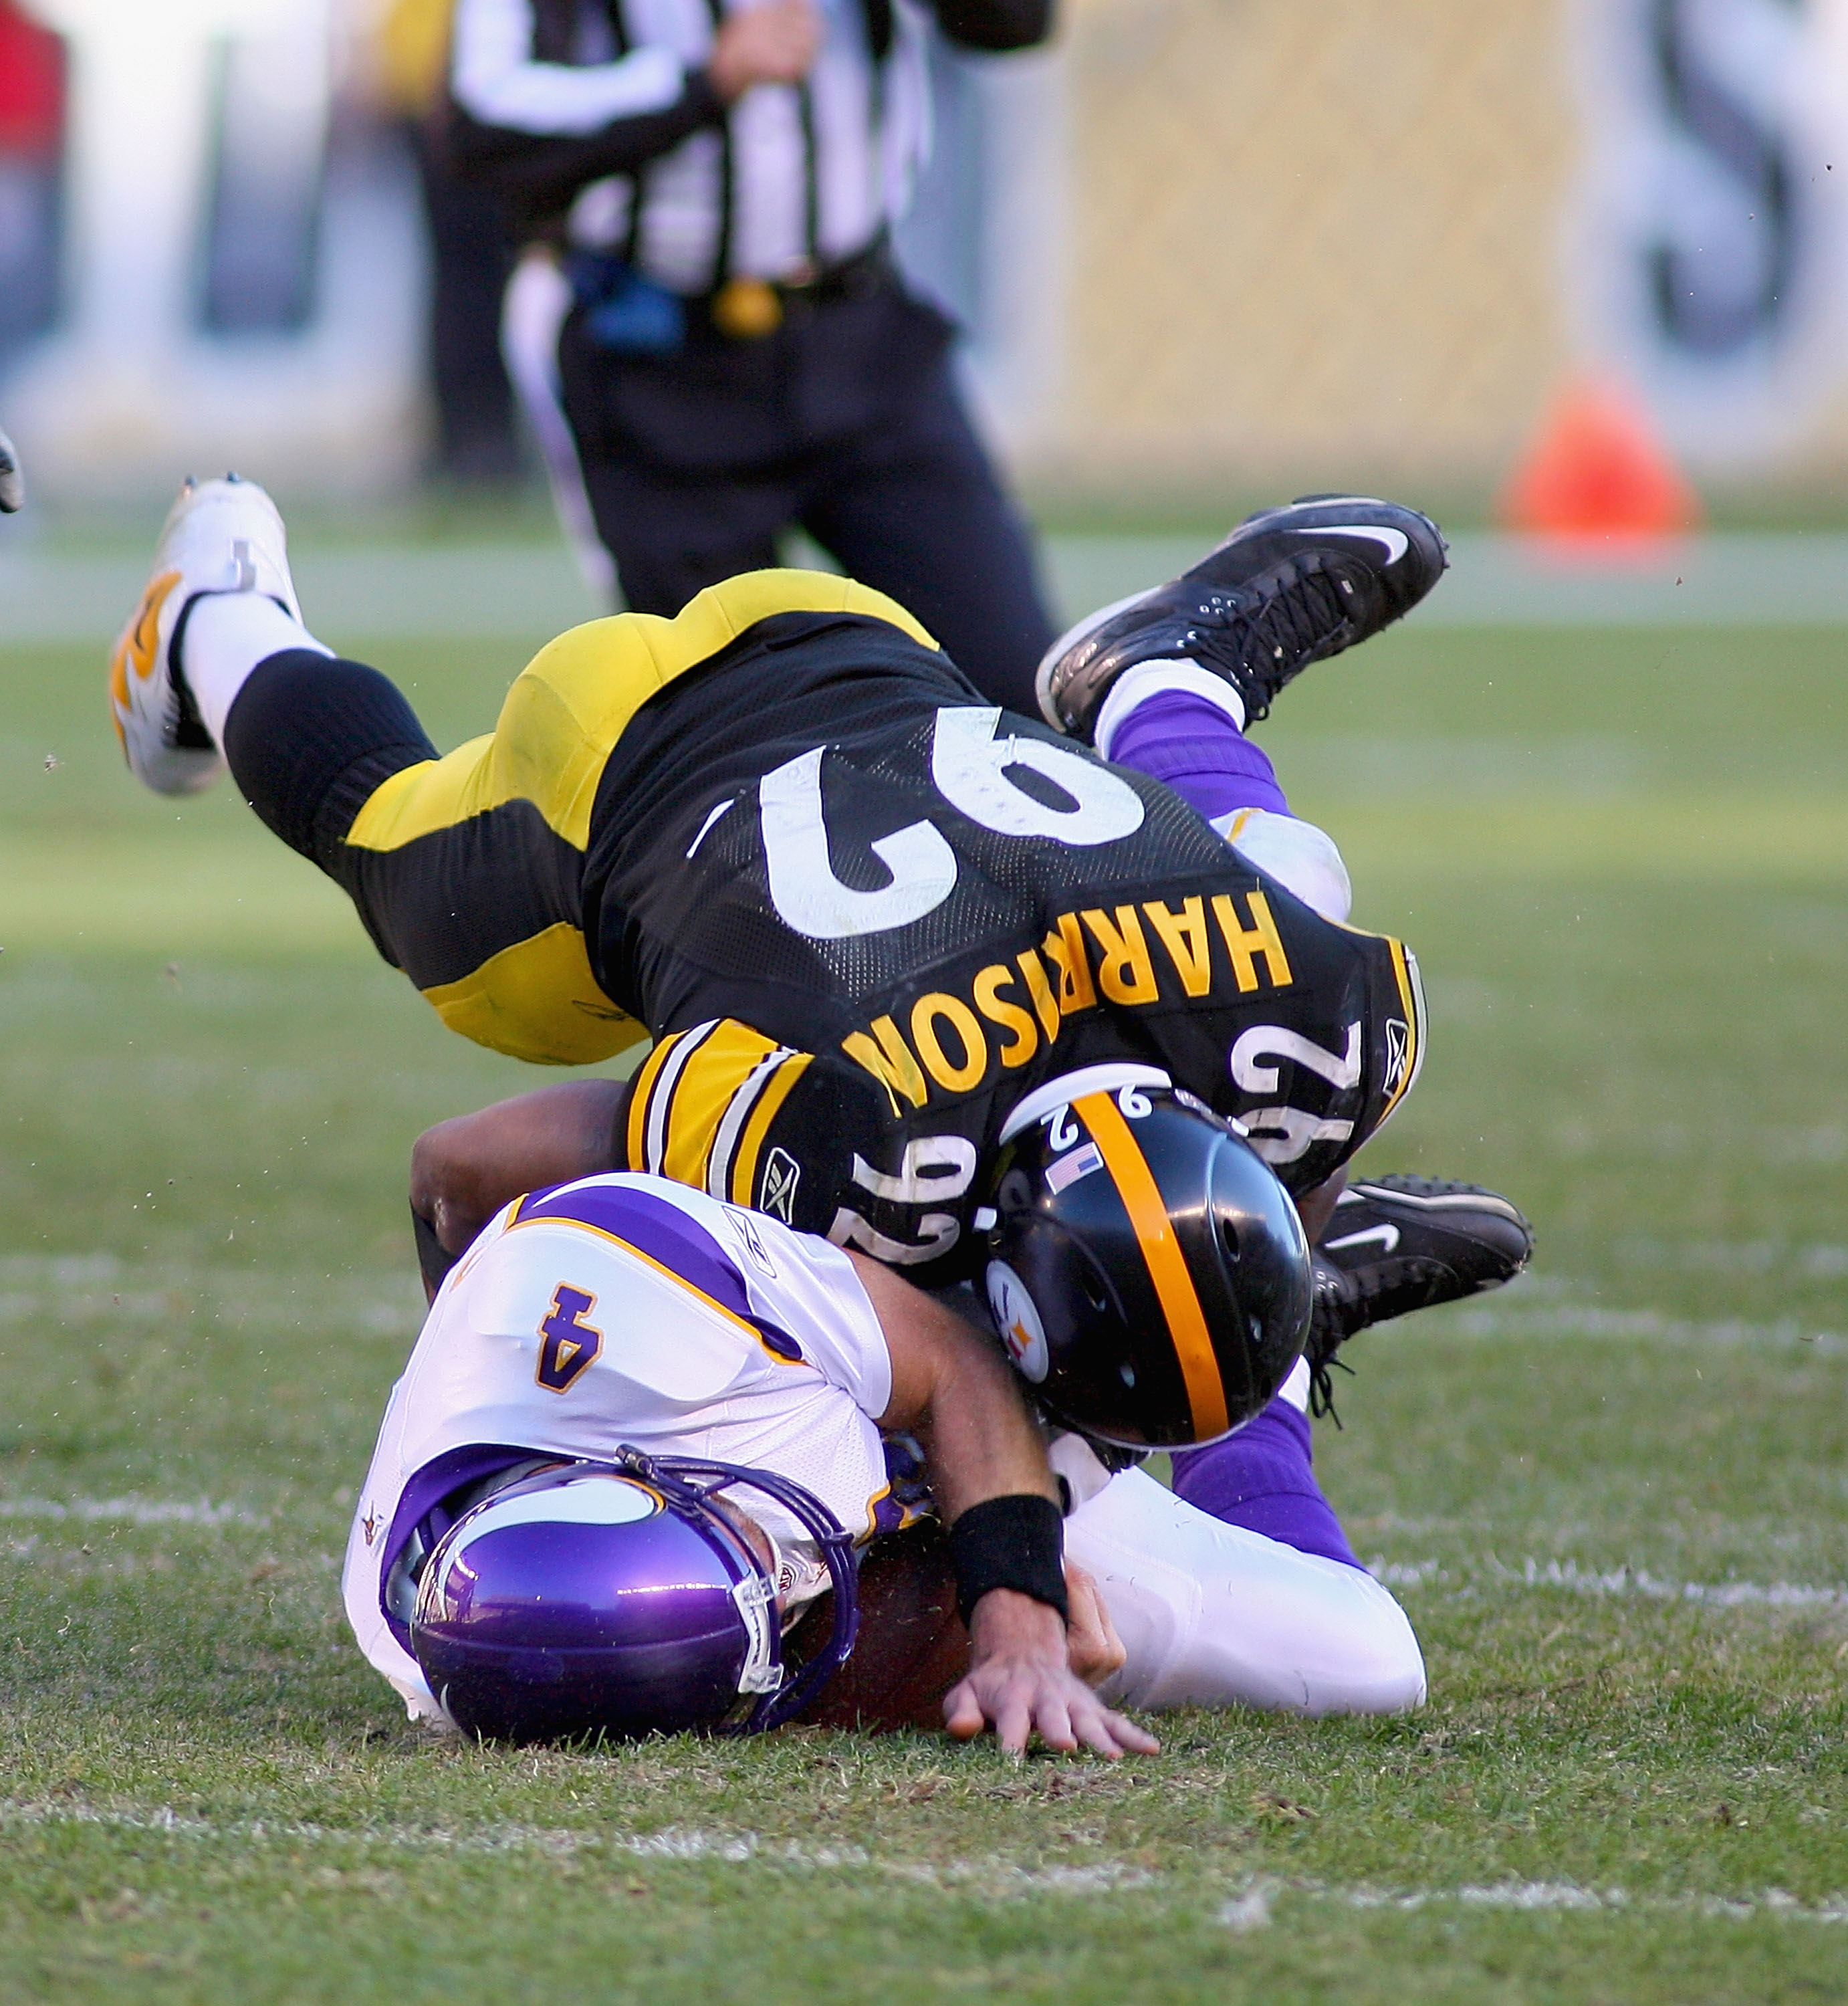 PITTSBURGH - OCTOBER 25:  Brett Favre #4  of the Minnesota Vikings is sacked on the last play of the game by James Harrison #92  of the Pittsburgh Steelers at Heinz Field on October 25, 2009 in Pittsburgh, Pennsylvania. Pittsburgh won 27-17. (Photo by Ric